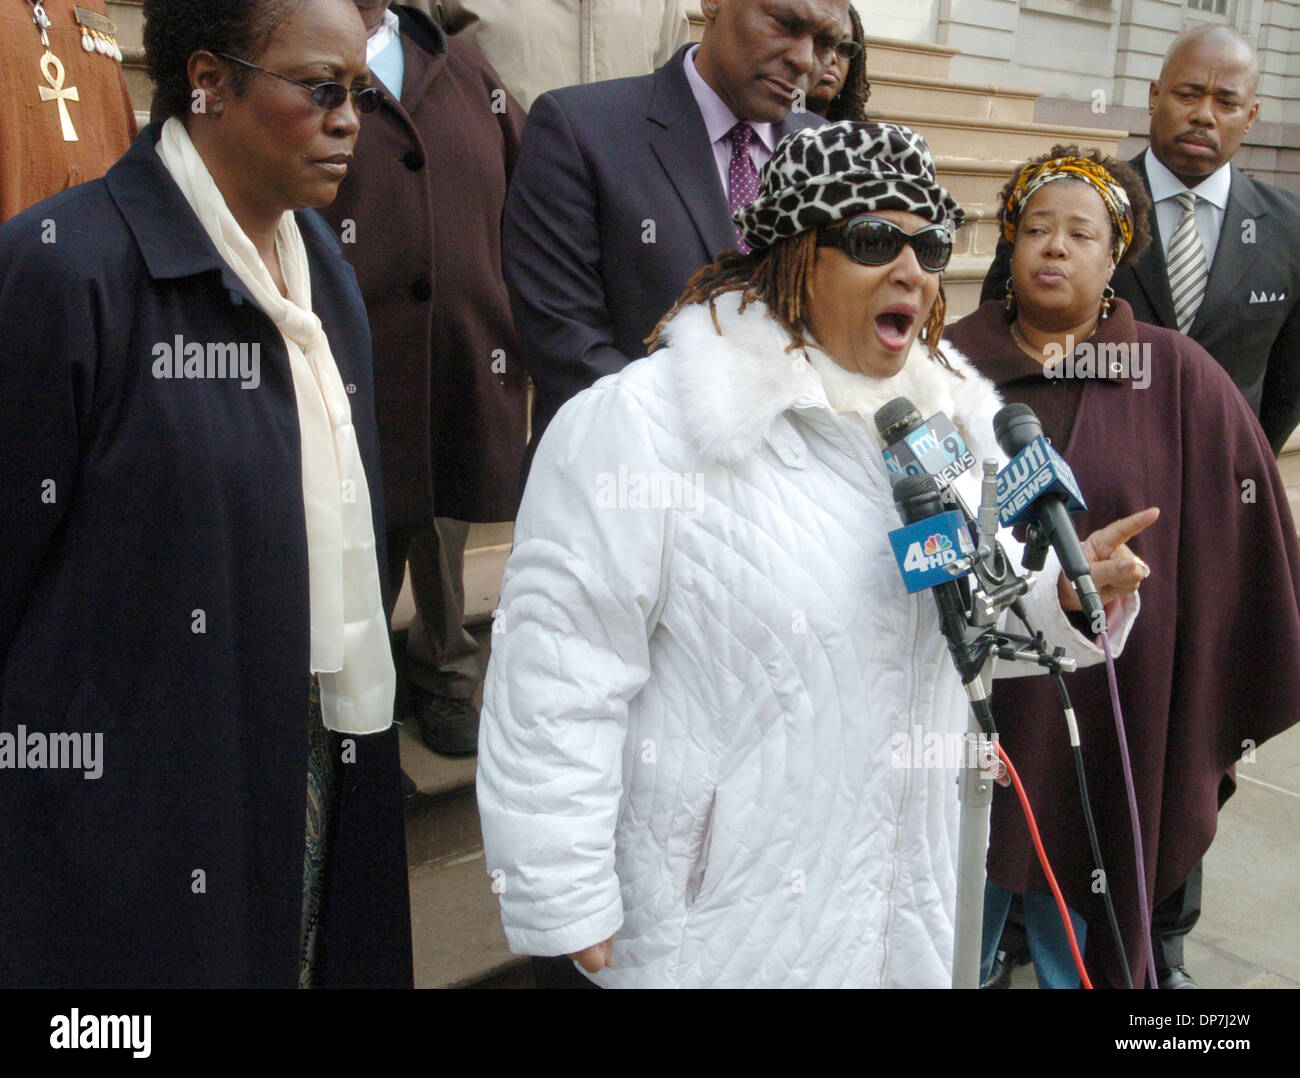 Nov 18, 2006; MANHATTAN, NEW YORK, USA; Jean Corbett Parker (L), of Harlem whose son Latran Parker was 26 when he was shot and killed in 2001 at the corner of 131st Street and 7th Avenue looks on as Jackie Rowe-Adams, (C) of Harlem discusses the separate shooting deaths of her sons Anthony Bouldin, 17 at the time and killed at 122nd and 7th Avenue and Tyrone Bouldin, 28 at the time Stock Photo